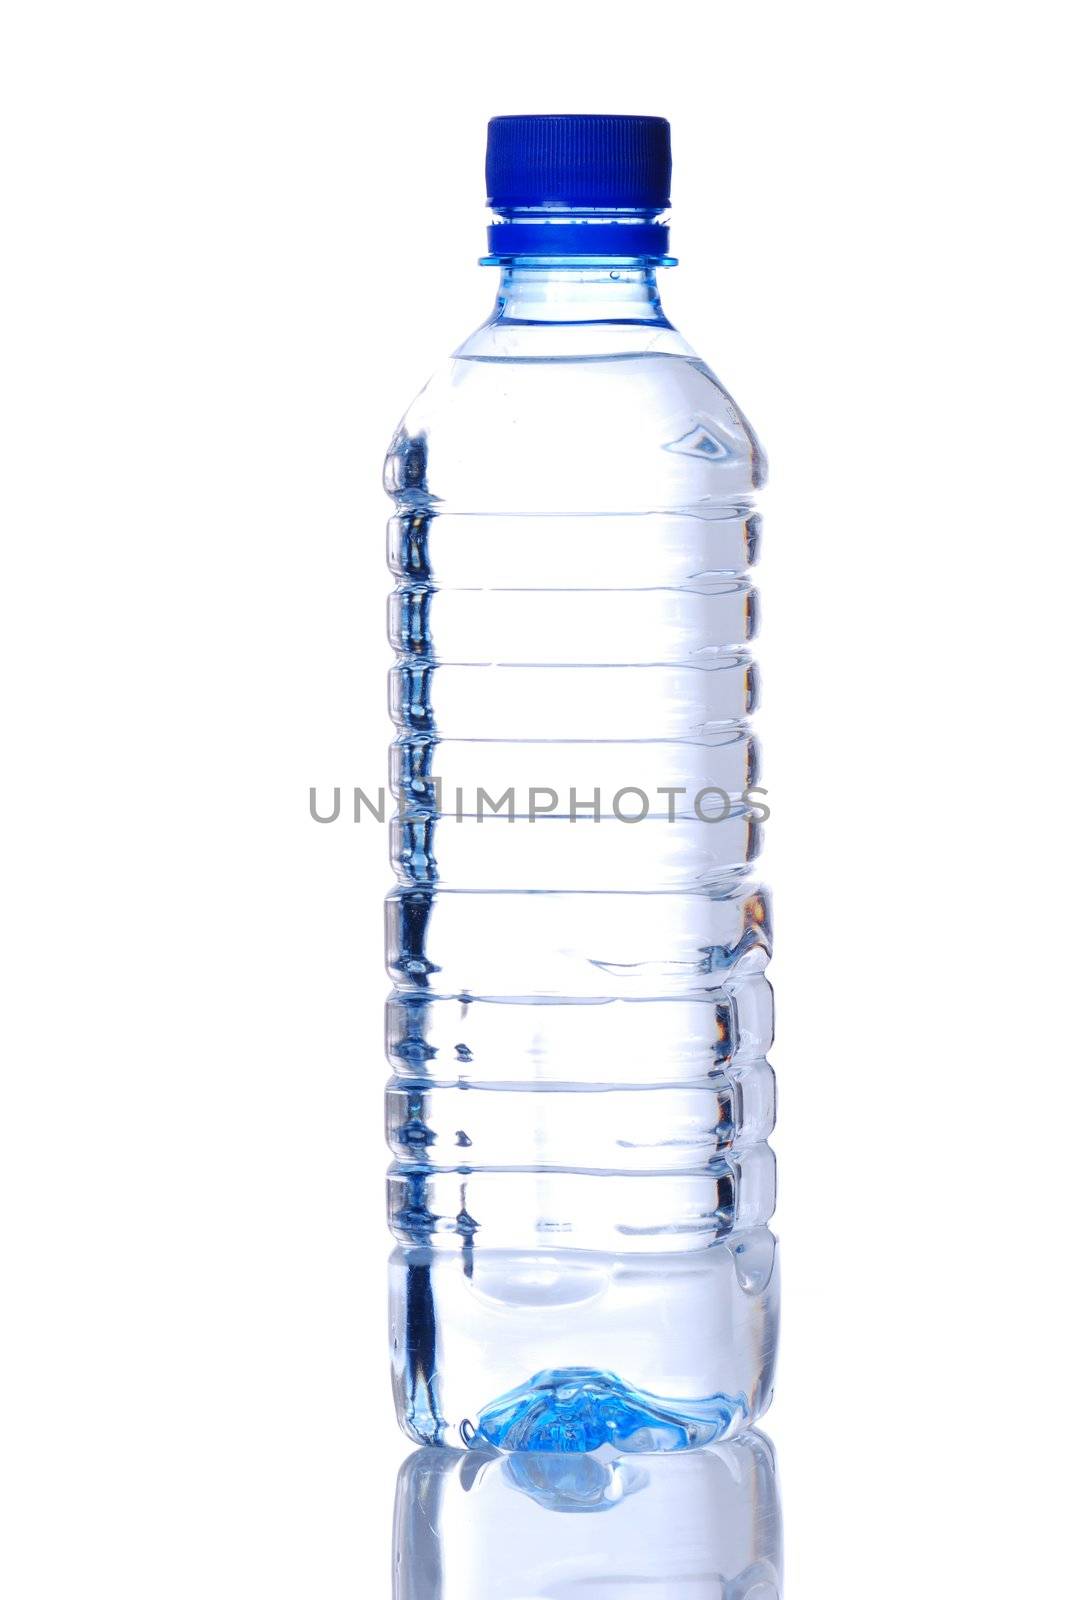 Bottle of water. Isolated on white, with reflection.